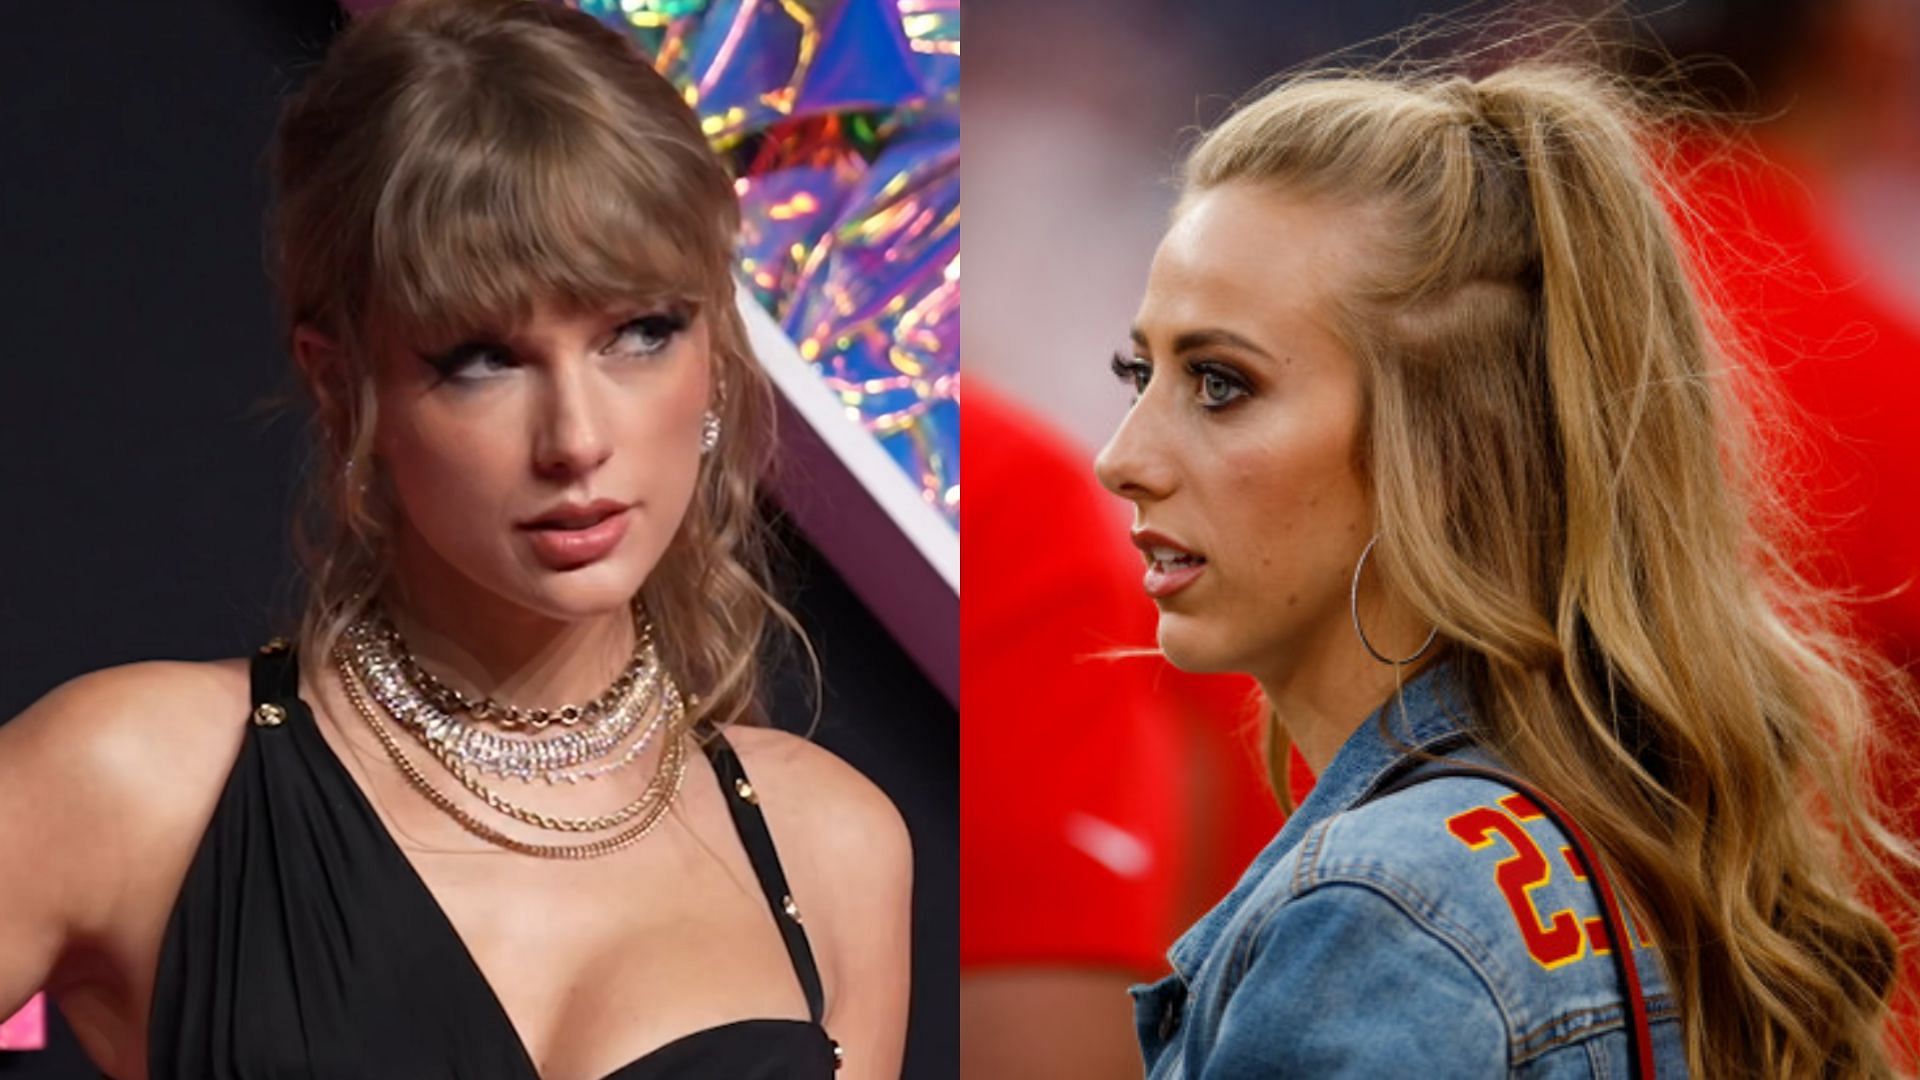 A friendship is budding between Taylor Swift and Brittany Mahomes.